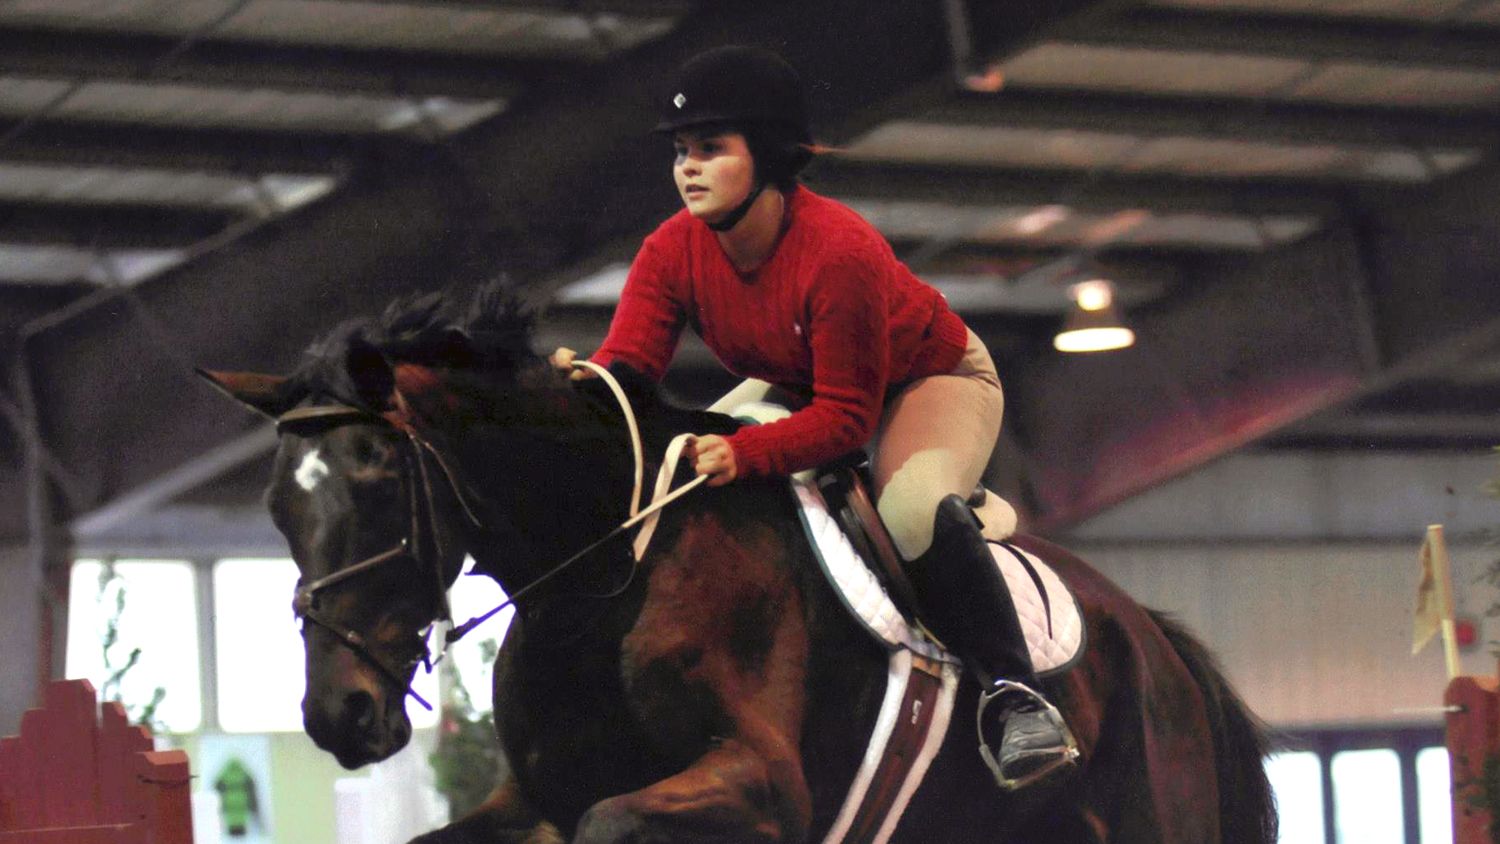 CALS student Shelby Lanier riding a horse during competition.